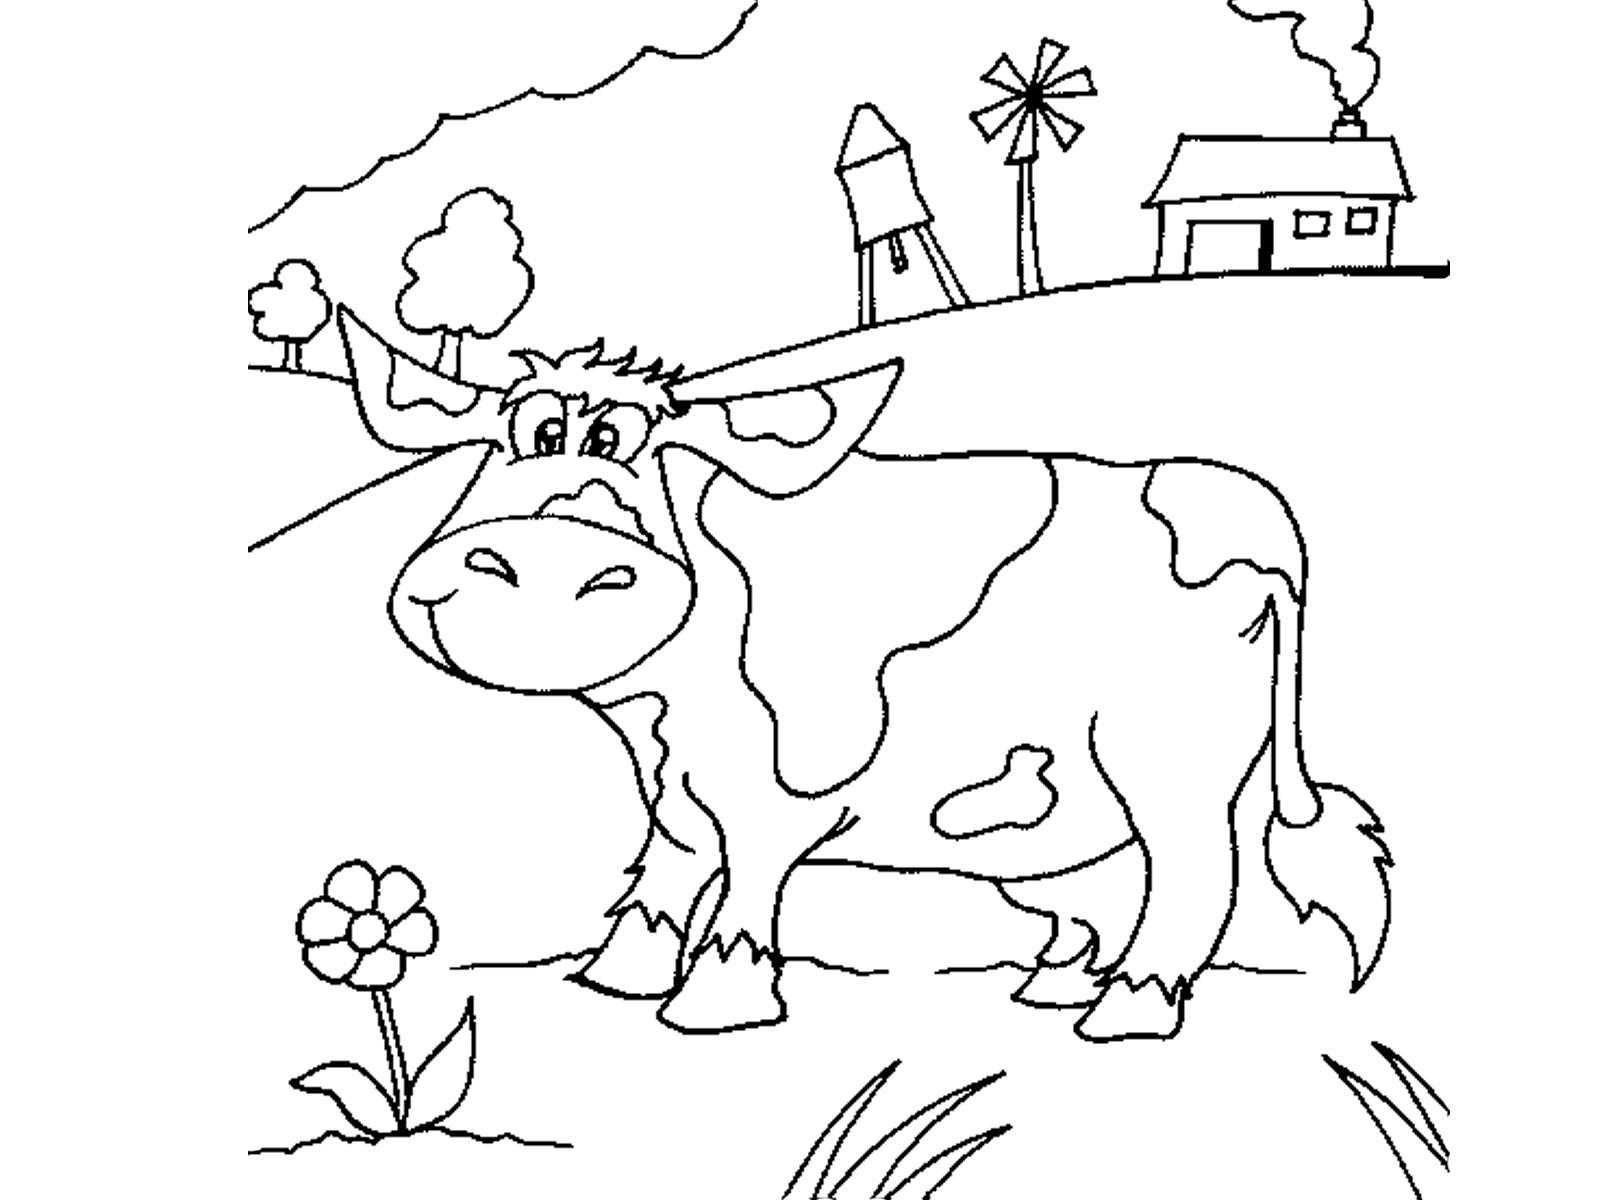 Coloring Farm with cow on meadow. Category Pets allowed. Tags:  cow, flower, farm.